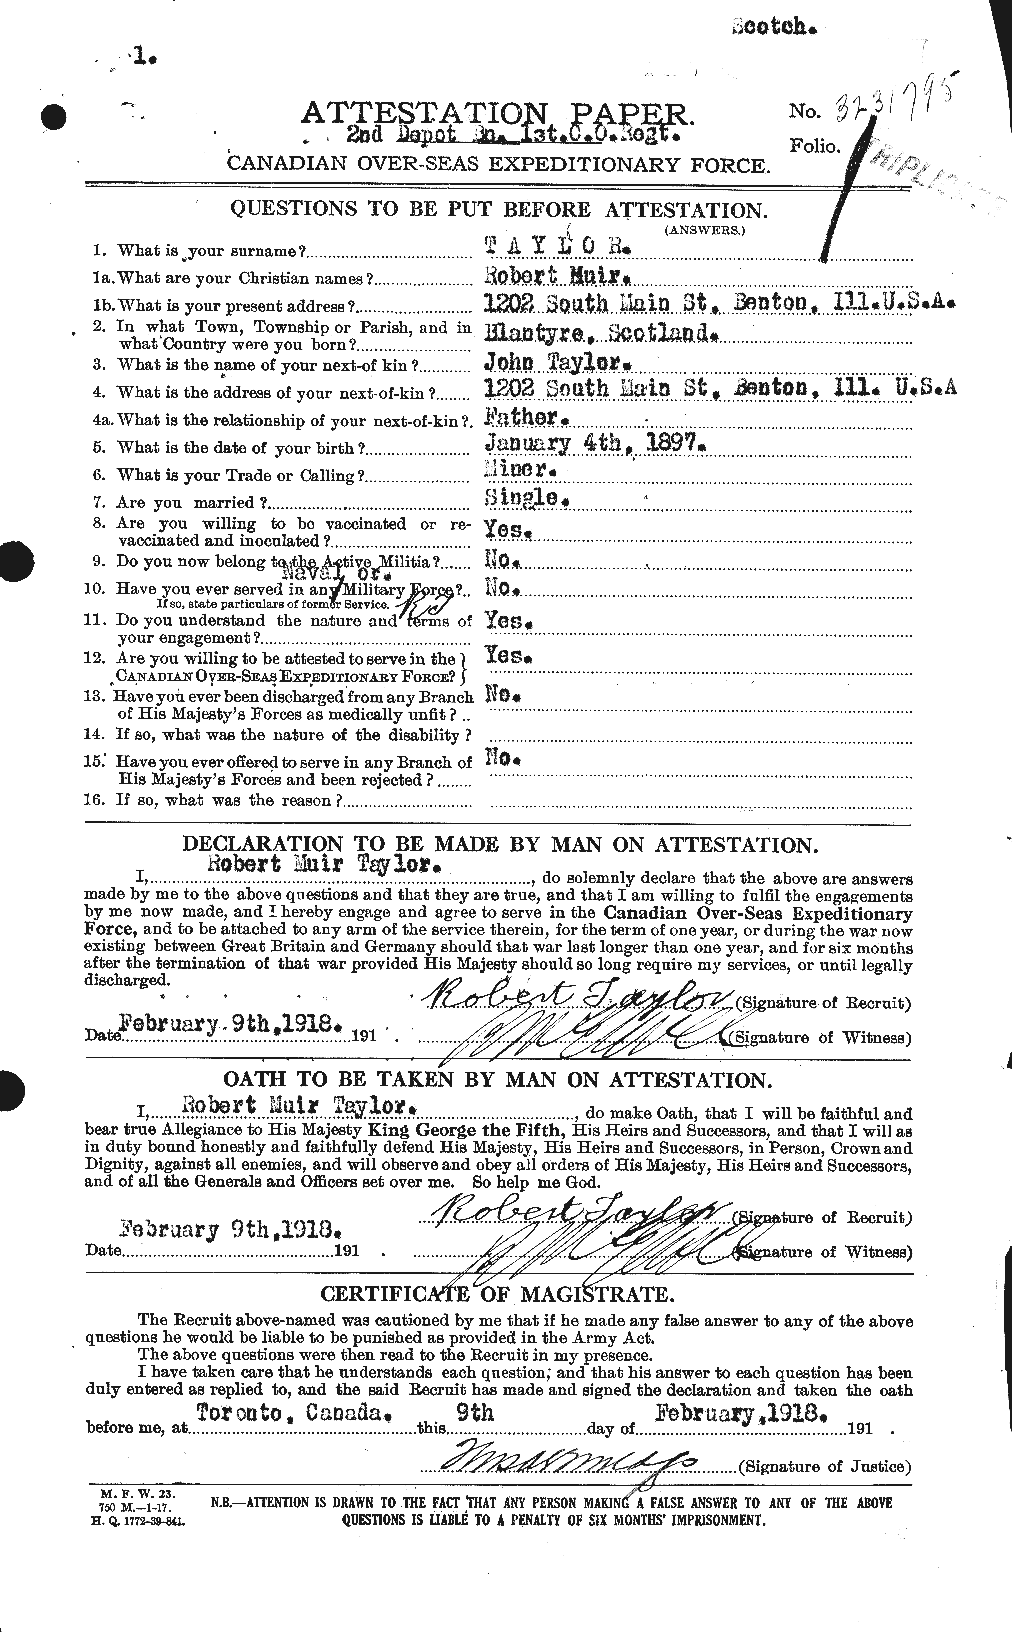 Personnel Records of the First World War - CEF 627494a